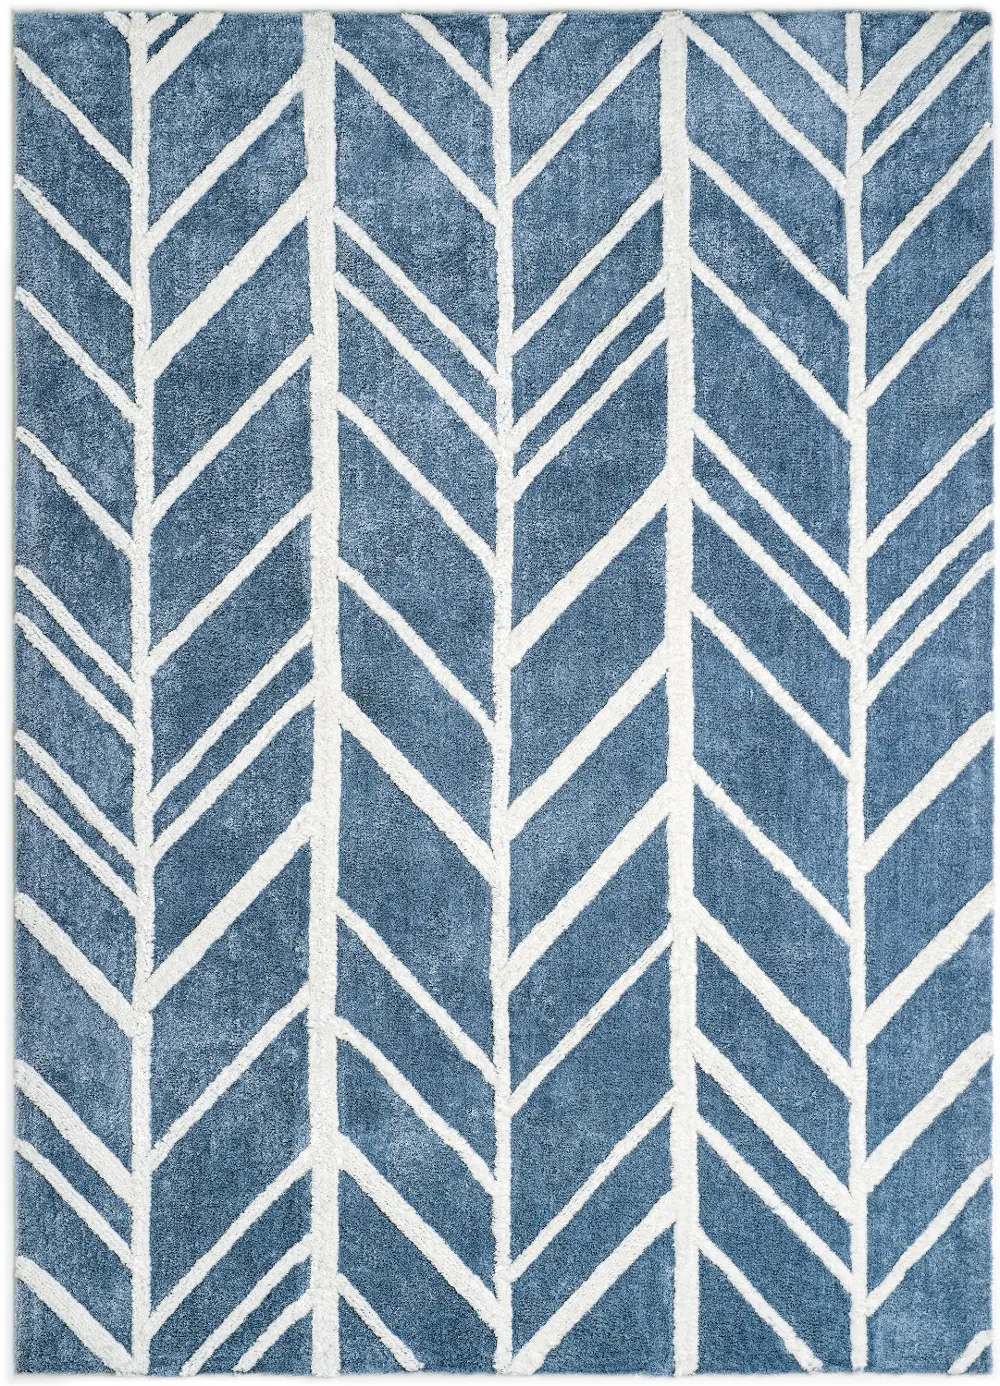 8 x 10 Large Bamboo Ivory and Blue Rug - Naturals-1